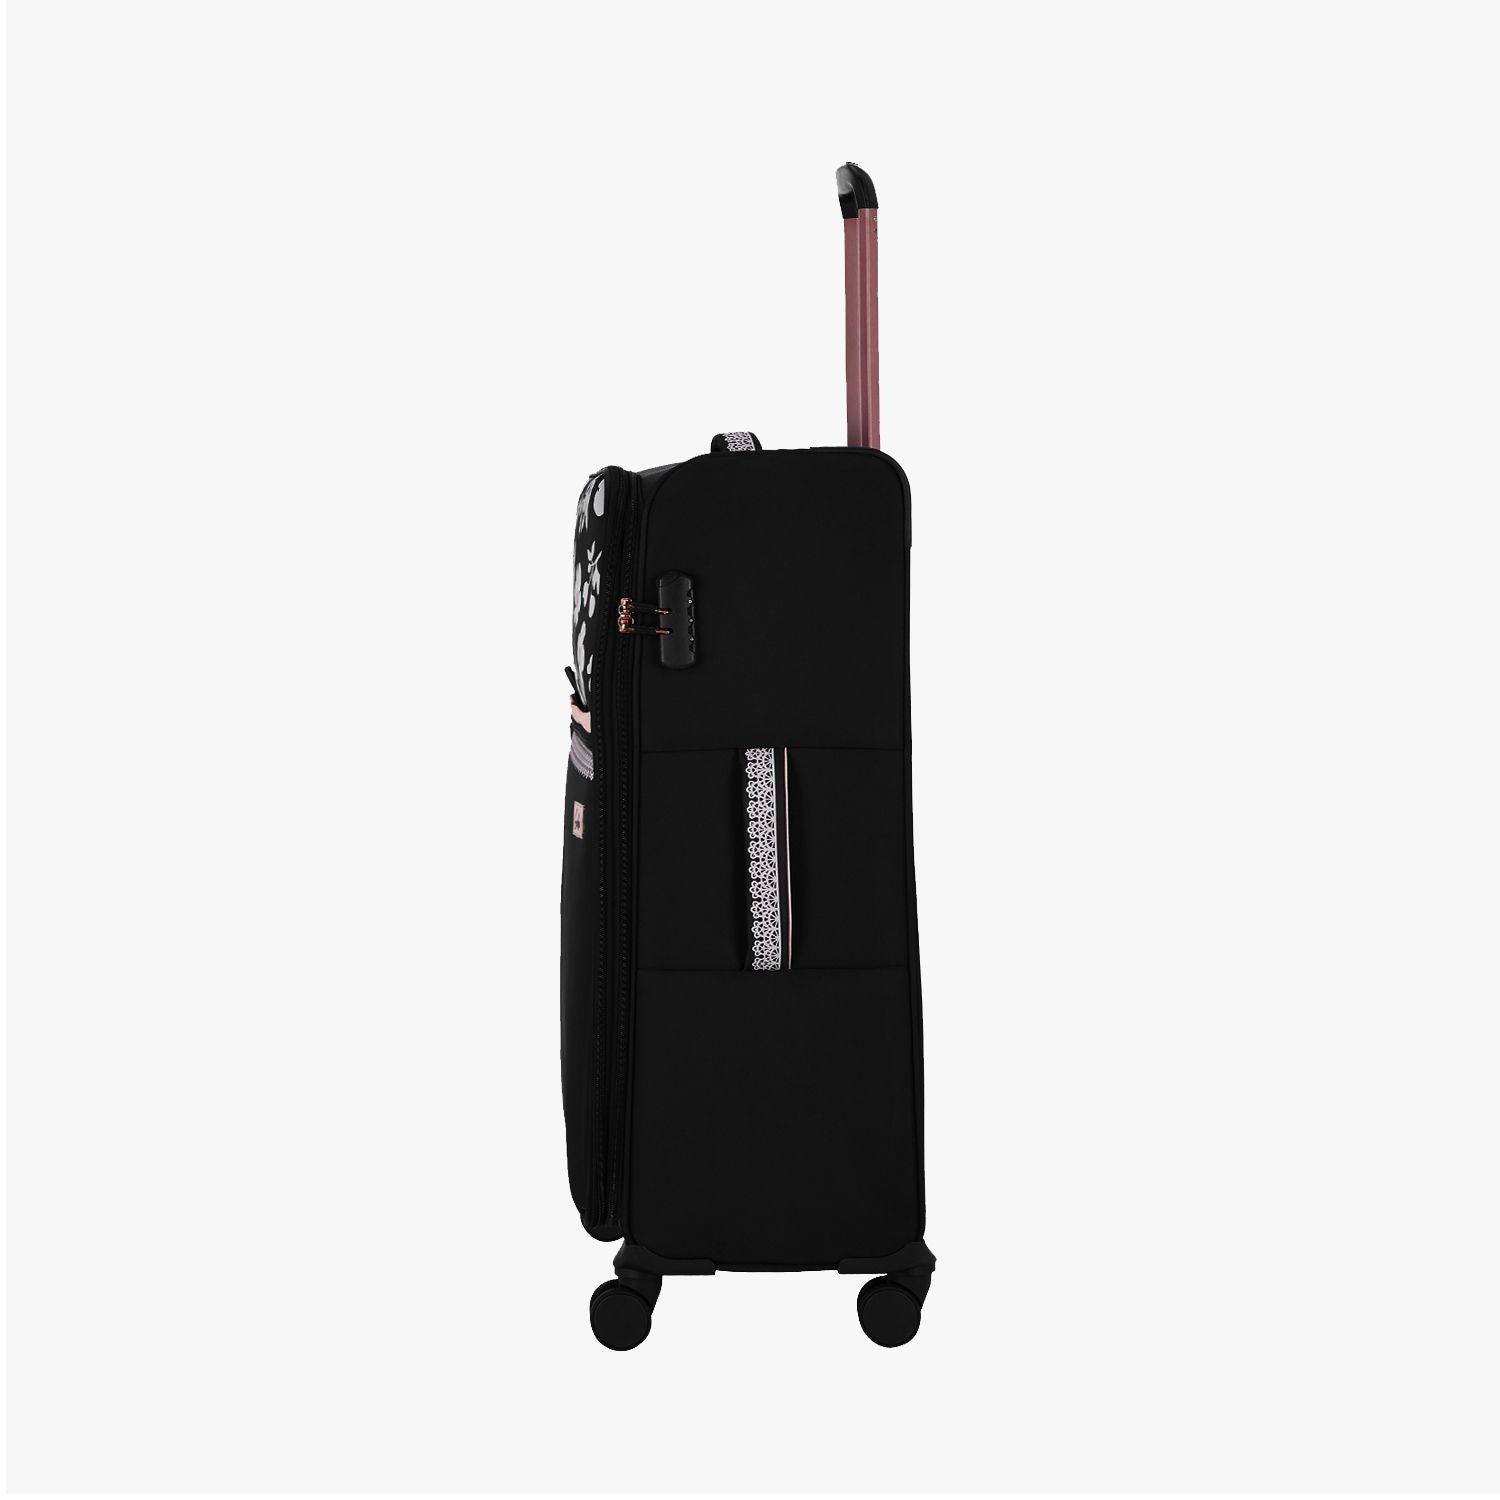 Genie Paramour Black Trolley Bag With Dual Wheels & Fixed Combination Lock